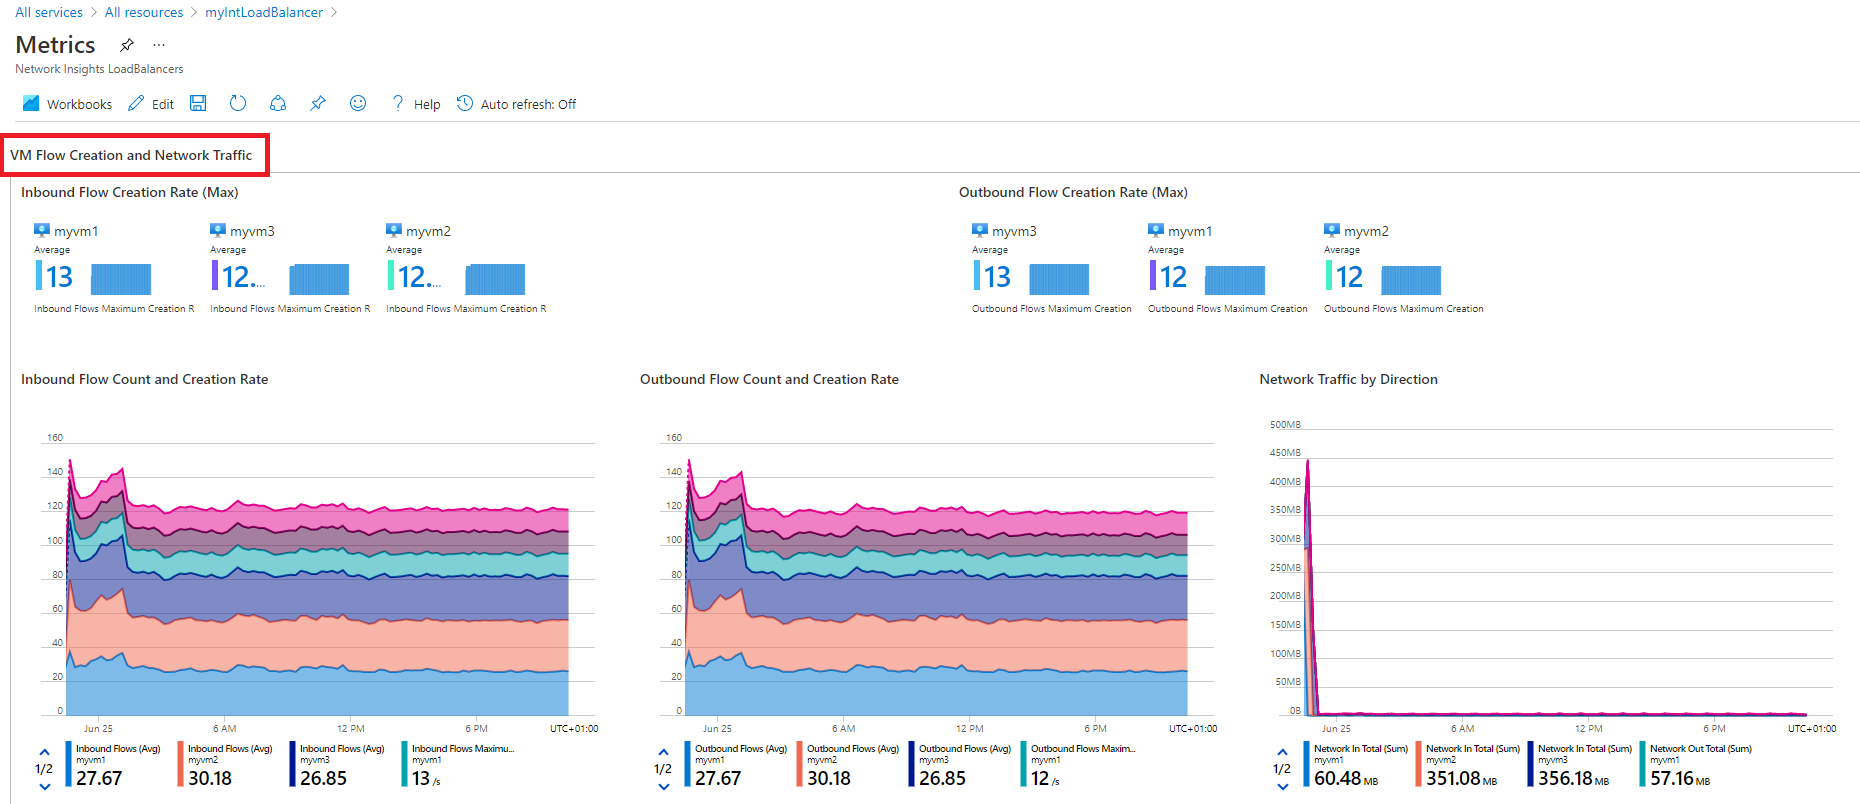 Azure Monitor Network Insights - Detailed metrics view - VM Flow Creation and Network Traffic charts